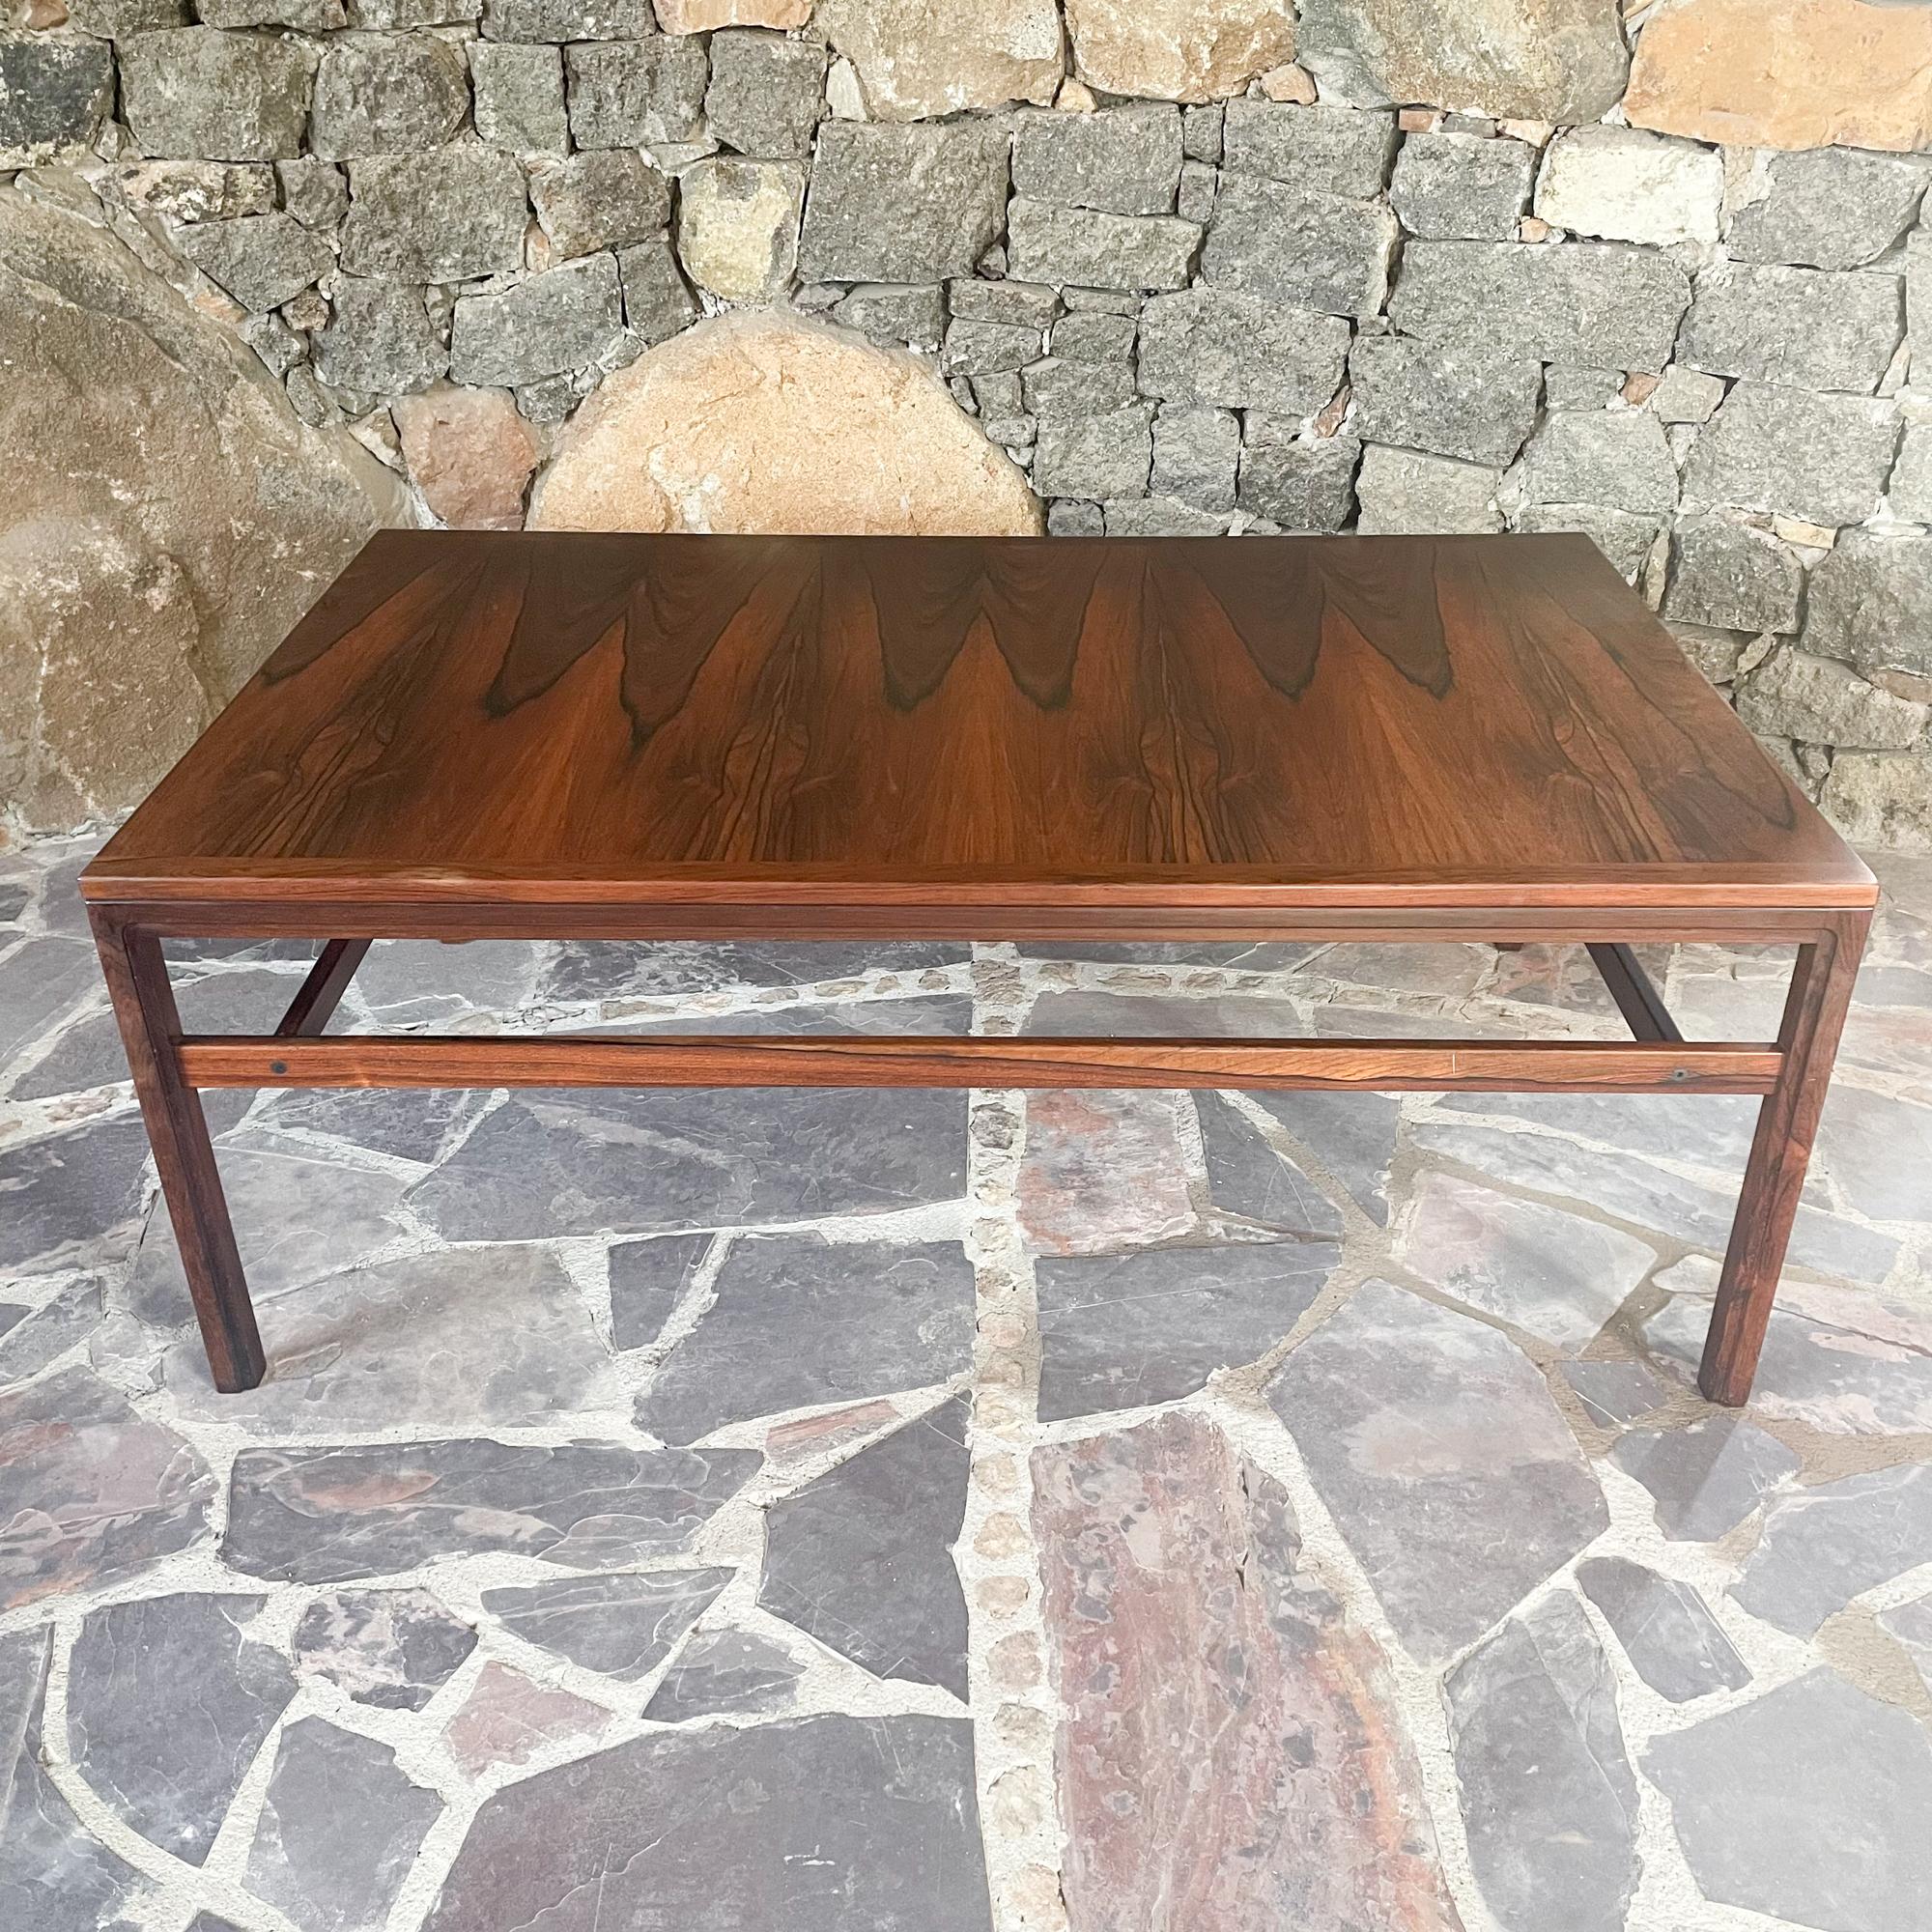 Exquisite Brazilian Rosewood Coffee Table Modern 1970s
19.75 h x 51.13 w x 31.63 inches
Legs can be removed, allowing for easy transport.
Unmarked, Ghost sticker underneath.
Preowned original vintage condition.
Review images.
Delivery to LA OC Palm